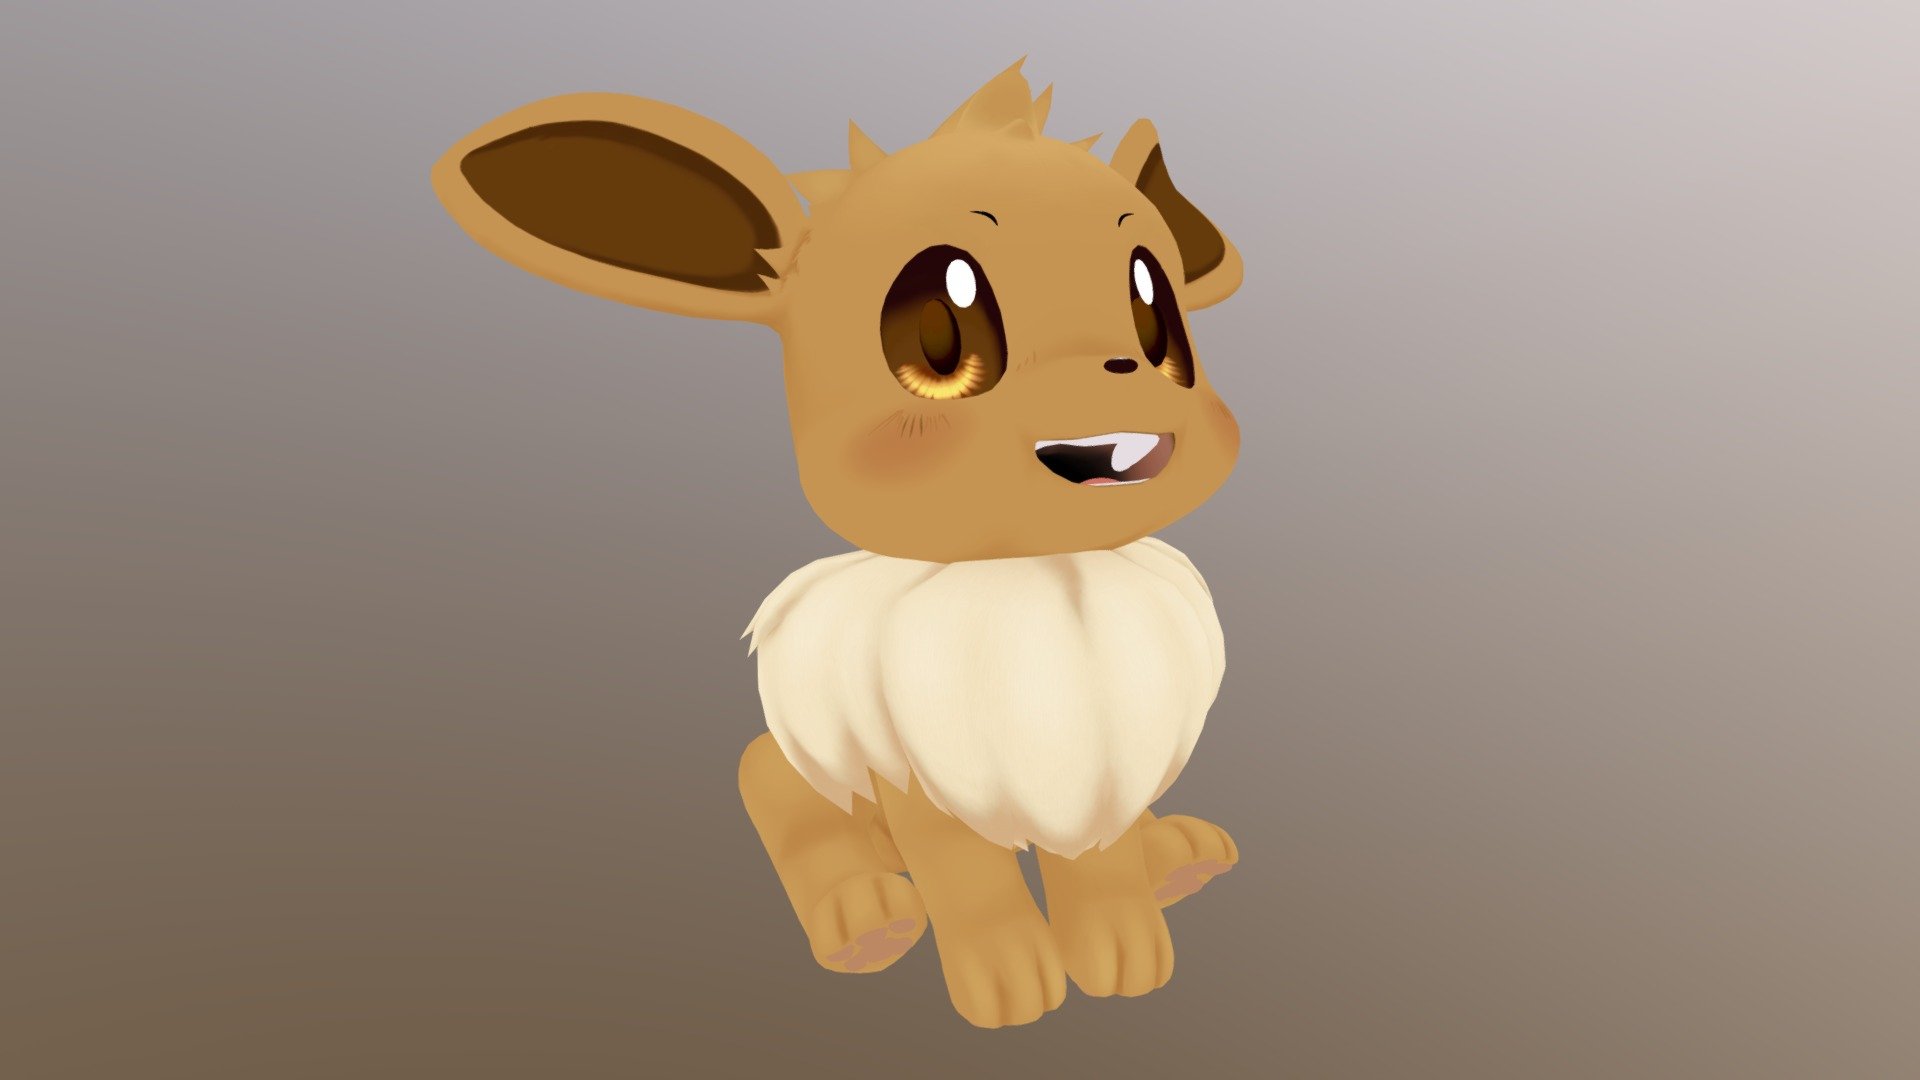 Based loosly on the offical model for Eevee. Used to practice creating unlit textures.
A simple sit loop 3d model